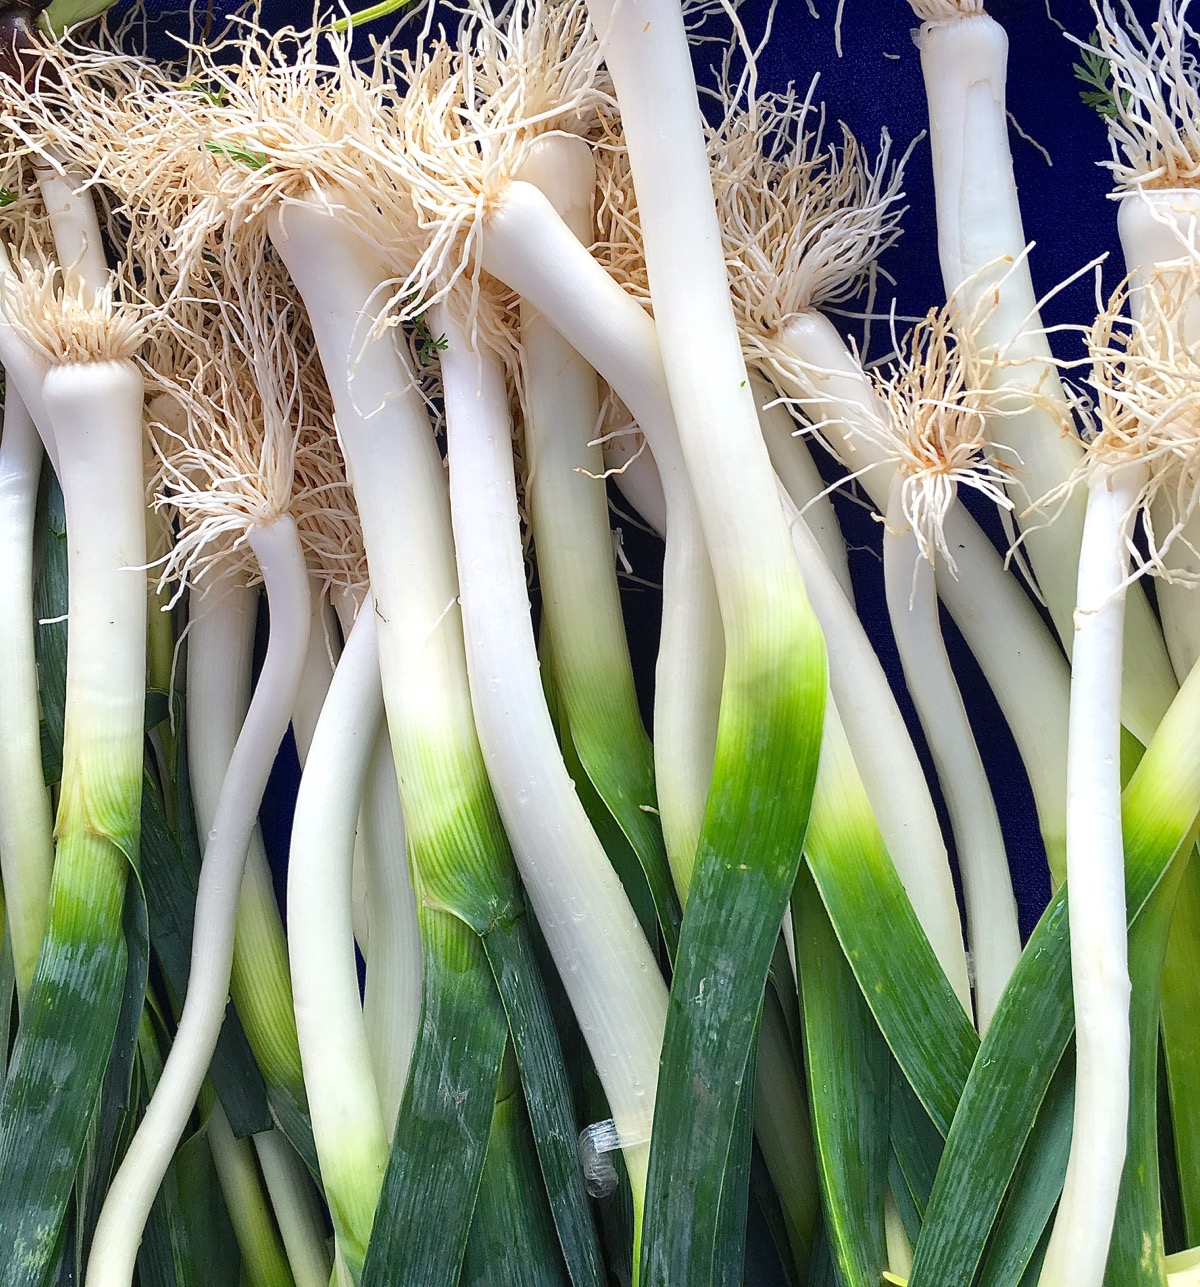 Bunches of scallions displayed at a farm stand.